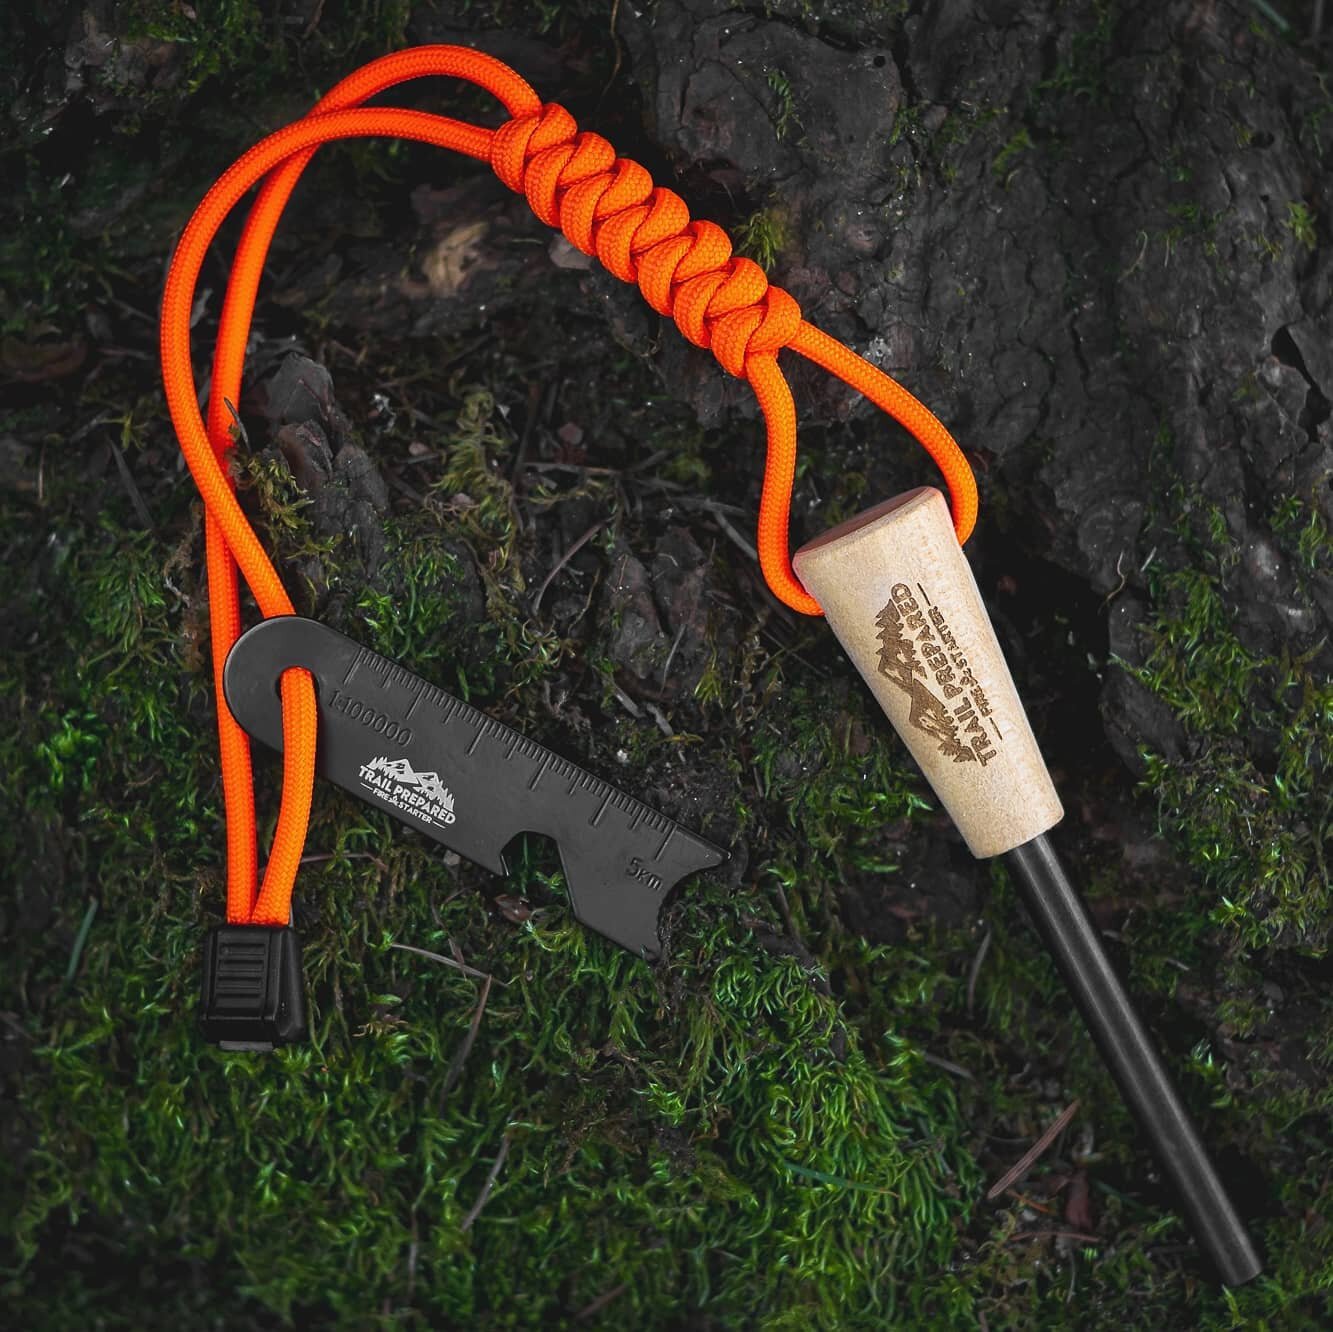 Product Update! 🏕️🔥💥
Our Fire Starter, now available with our new 11-in-1 survival paracord option! All the same great benefits of paracord, but now with additional built-in survival tools! To add to the standard mil-spec 7-strand inner nylon cord